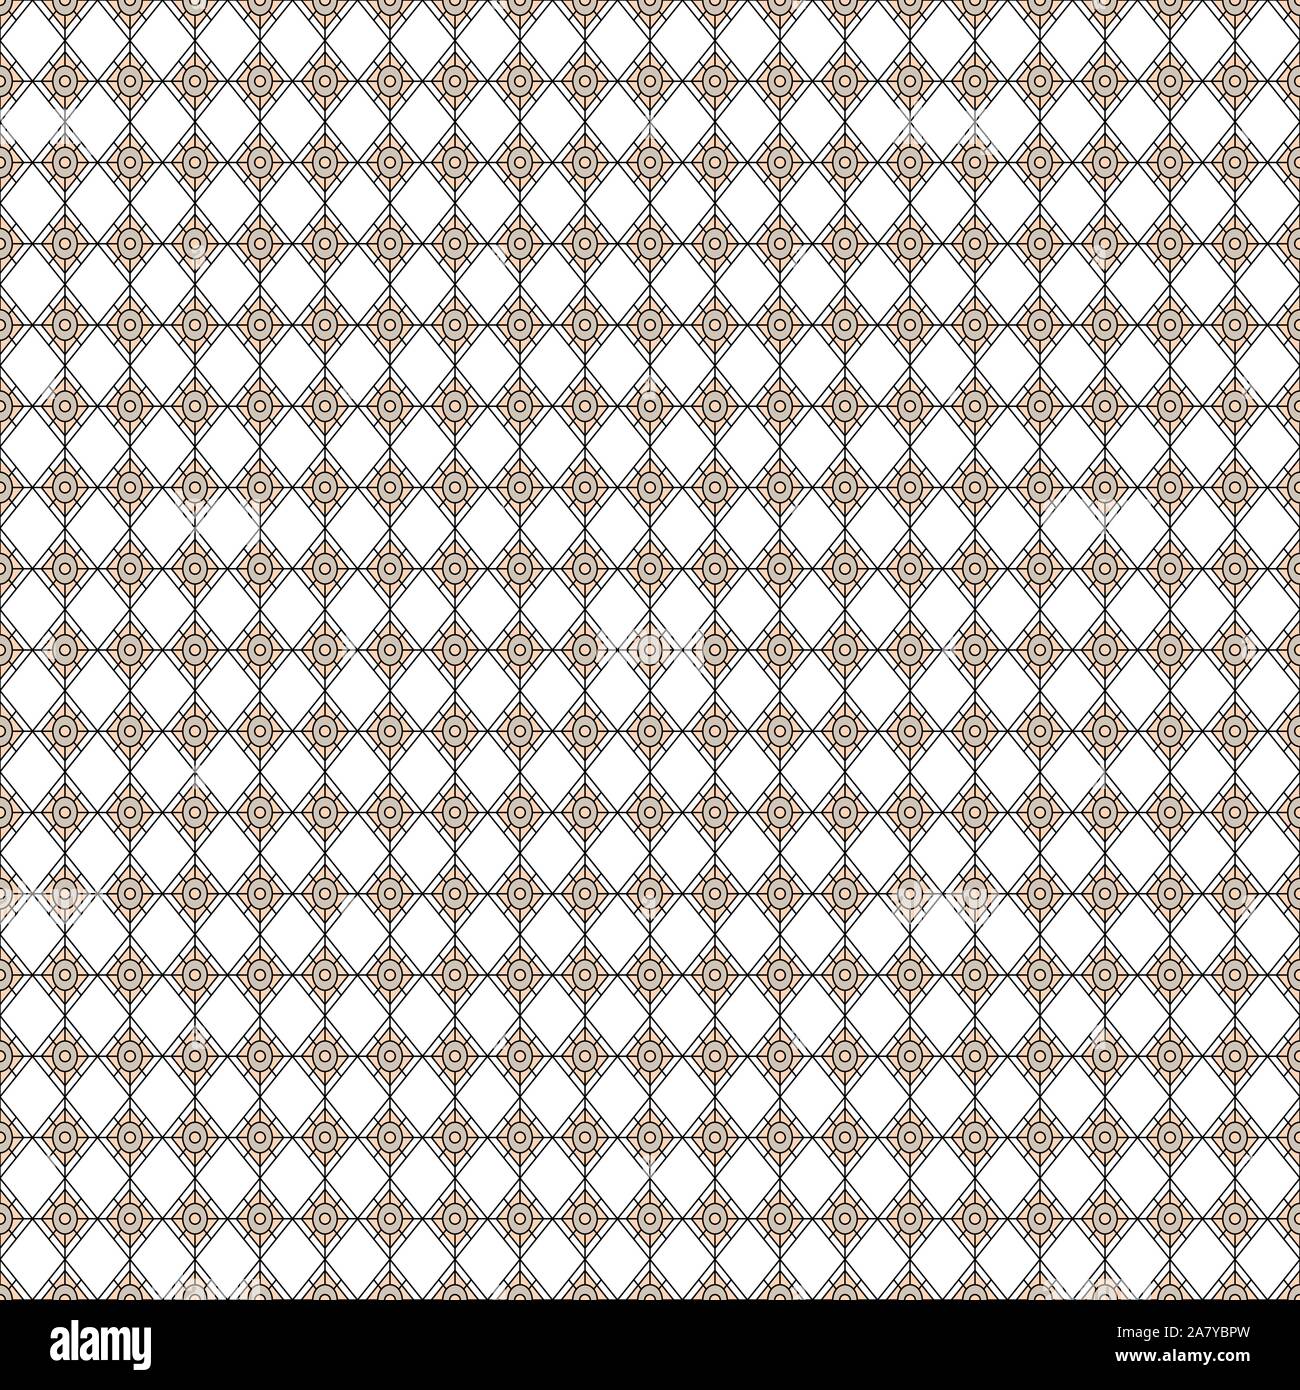 Vector white embossed pattern plastic grid seamless background. Diamond  shape cell endless texture. Web page fill light geometric pattern., Stock  vector